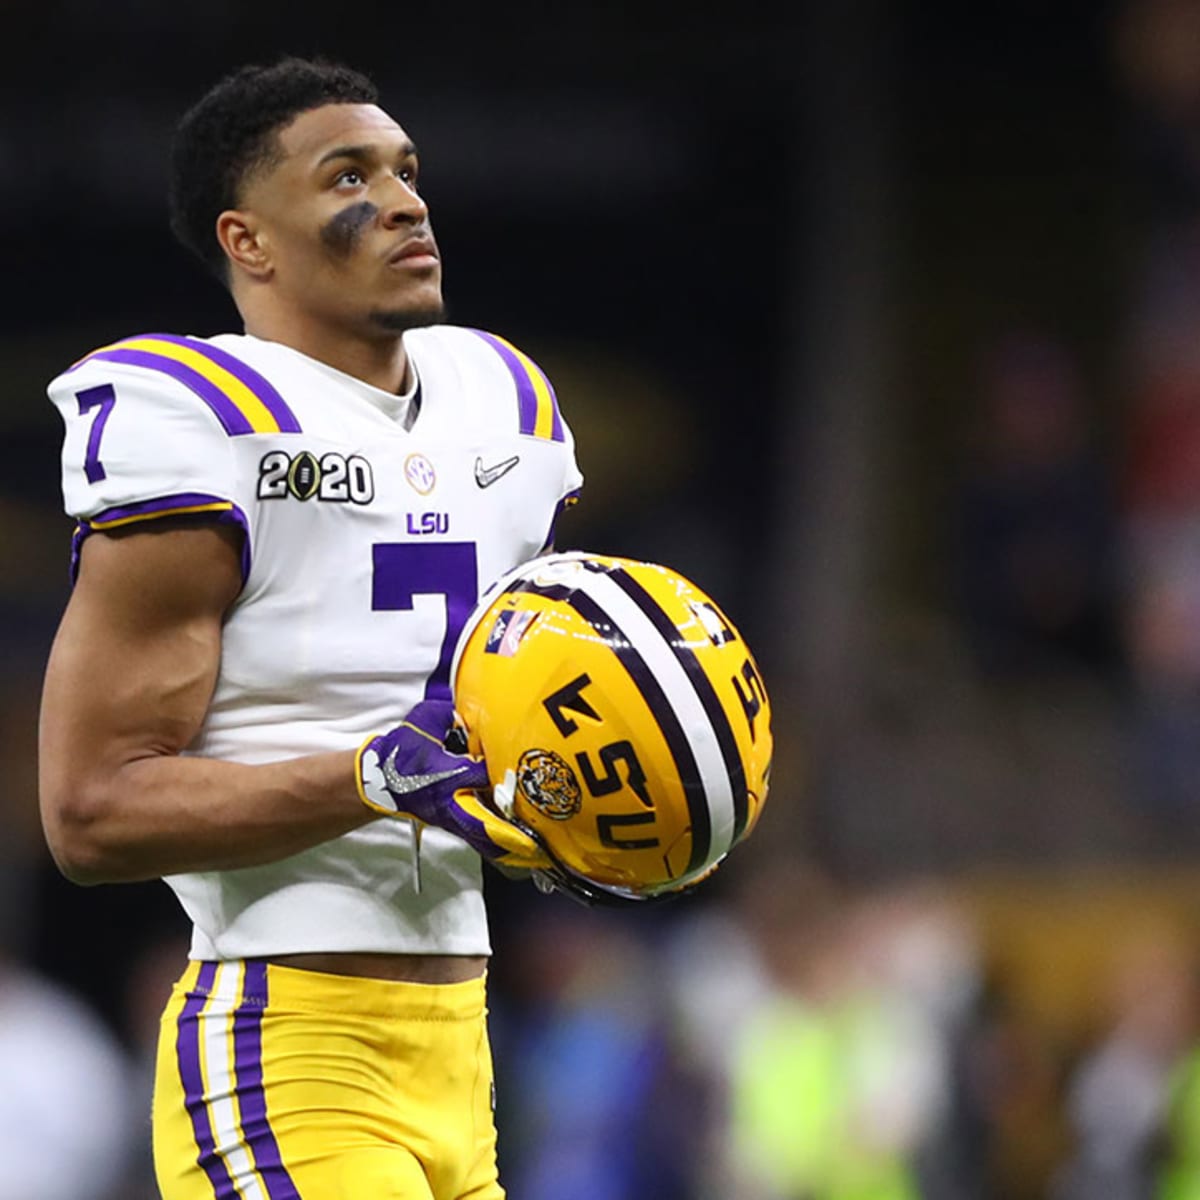 2020 NFL Draft: Safety rankings, top prospects - Sports Illustrated